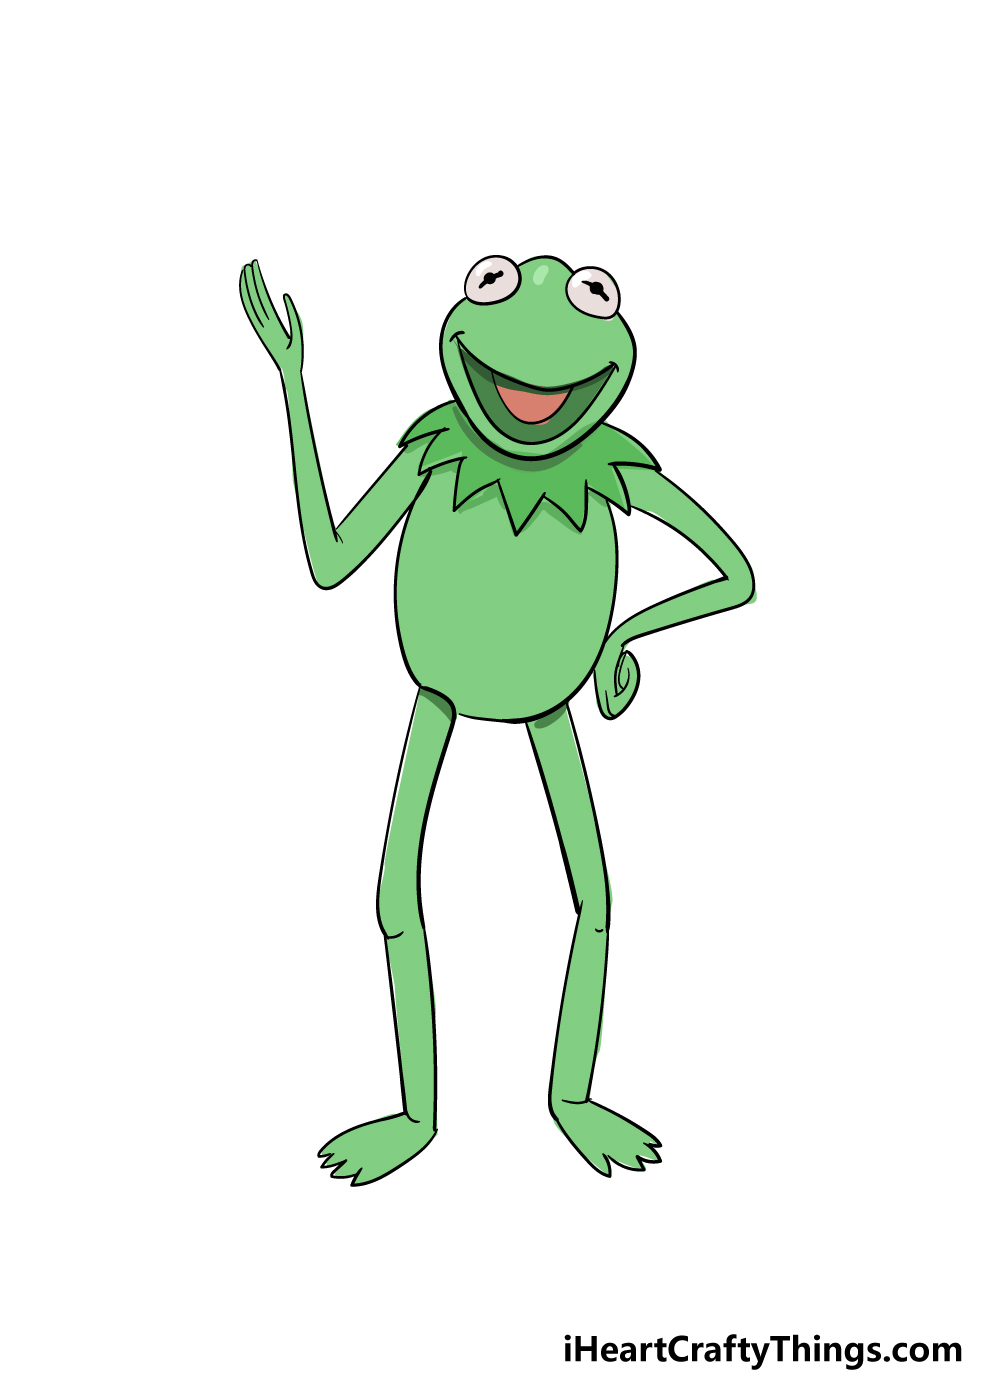 drawing Kermit the frog